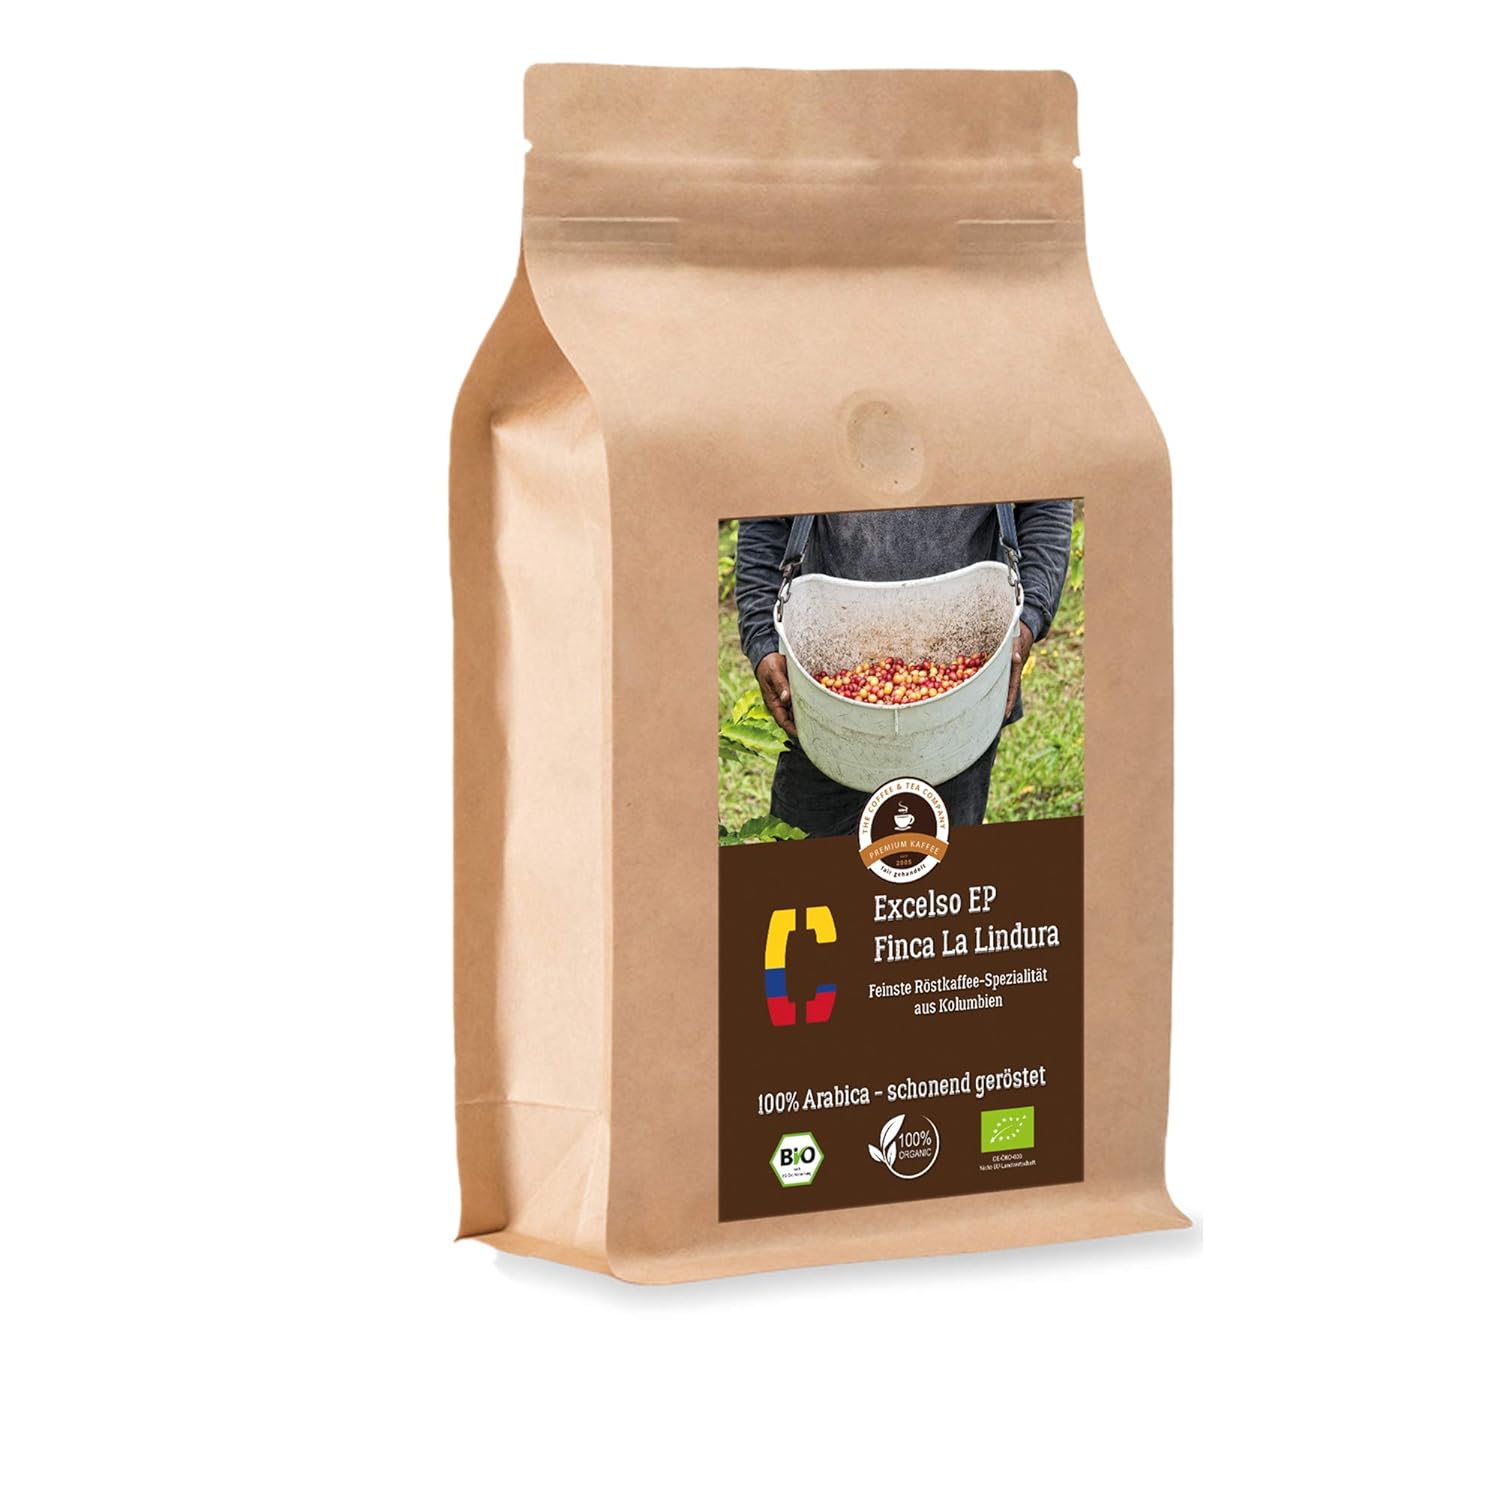 Coffee Globetrotter - Bio Colombia Excelso EP Finca la Lindura - 1000 g Finely Ground - for Fully Automatic Coffee Machine, Coffee Grinder, Hand Mill - Top Coffee - Roasted Coffee from Organic